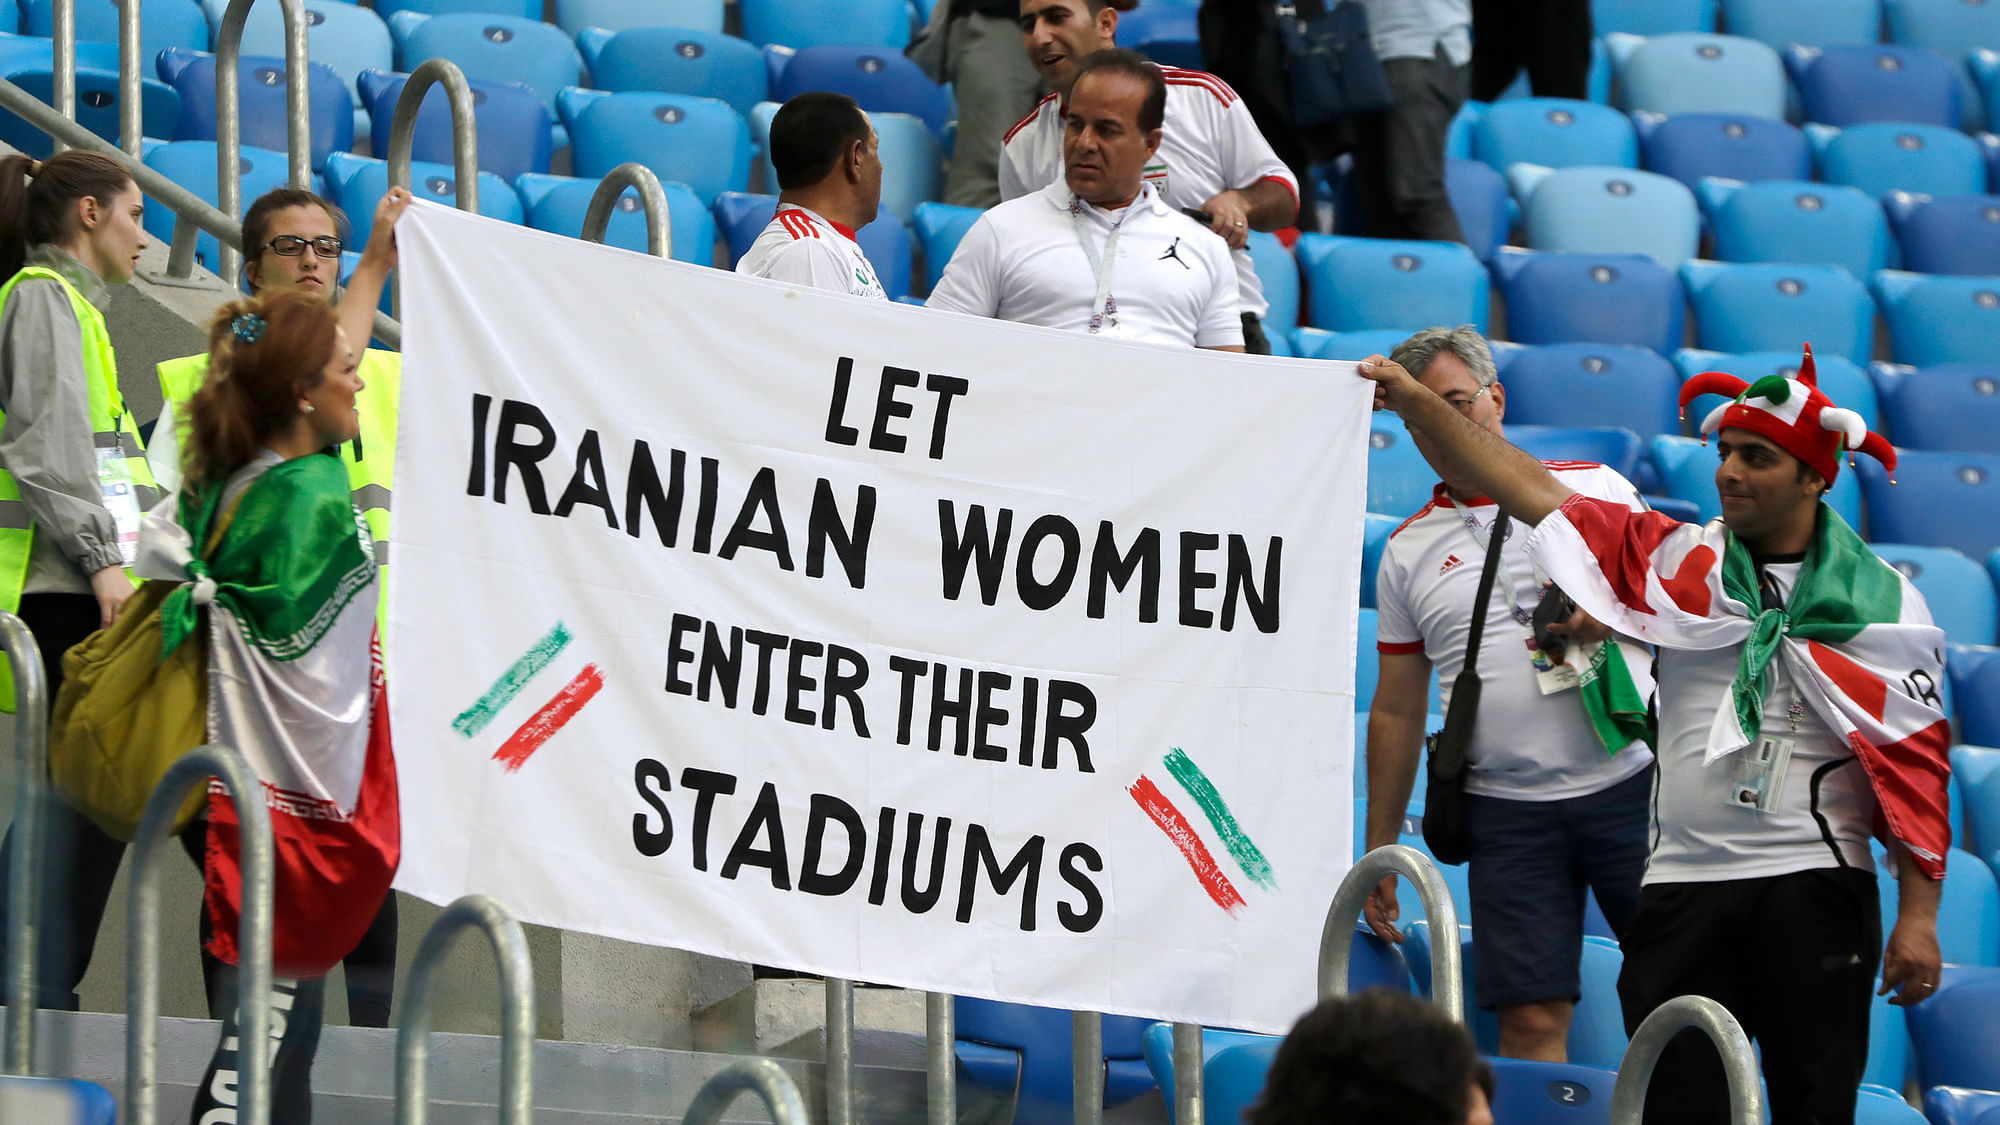 People supporting Iranian women hold a banner in the stands during the group B match between Morocco and Iran at the 2018 soccer World Cup in the St. Petersburg Stadium in St. Petersburg, Russia, Friday, June 15, 2018.&nbsp;